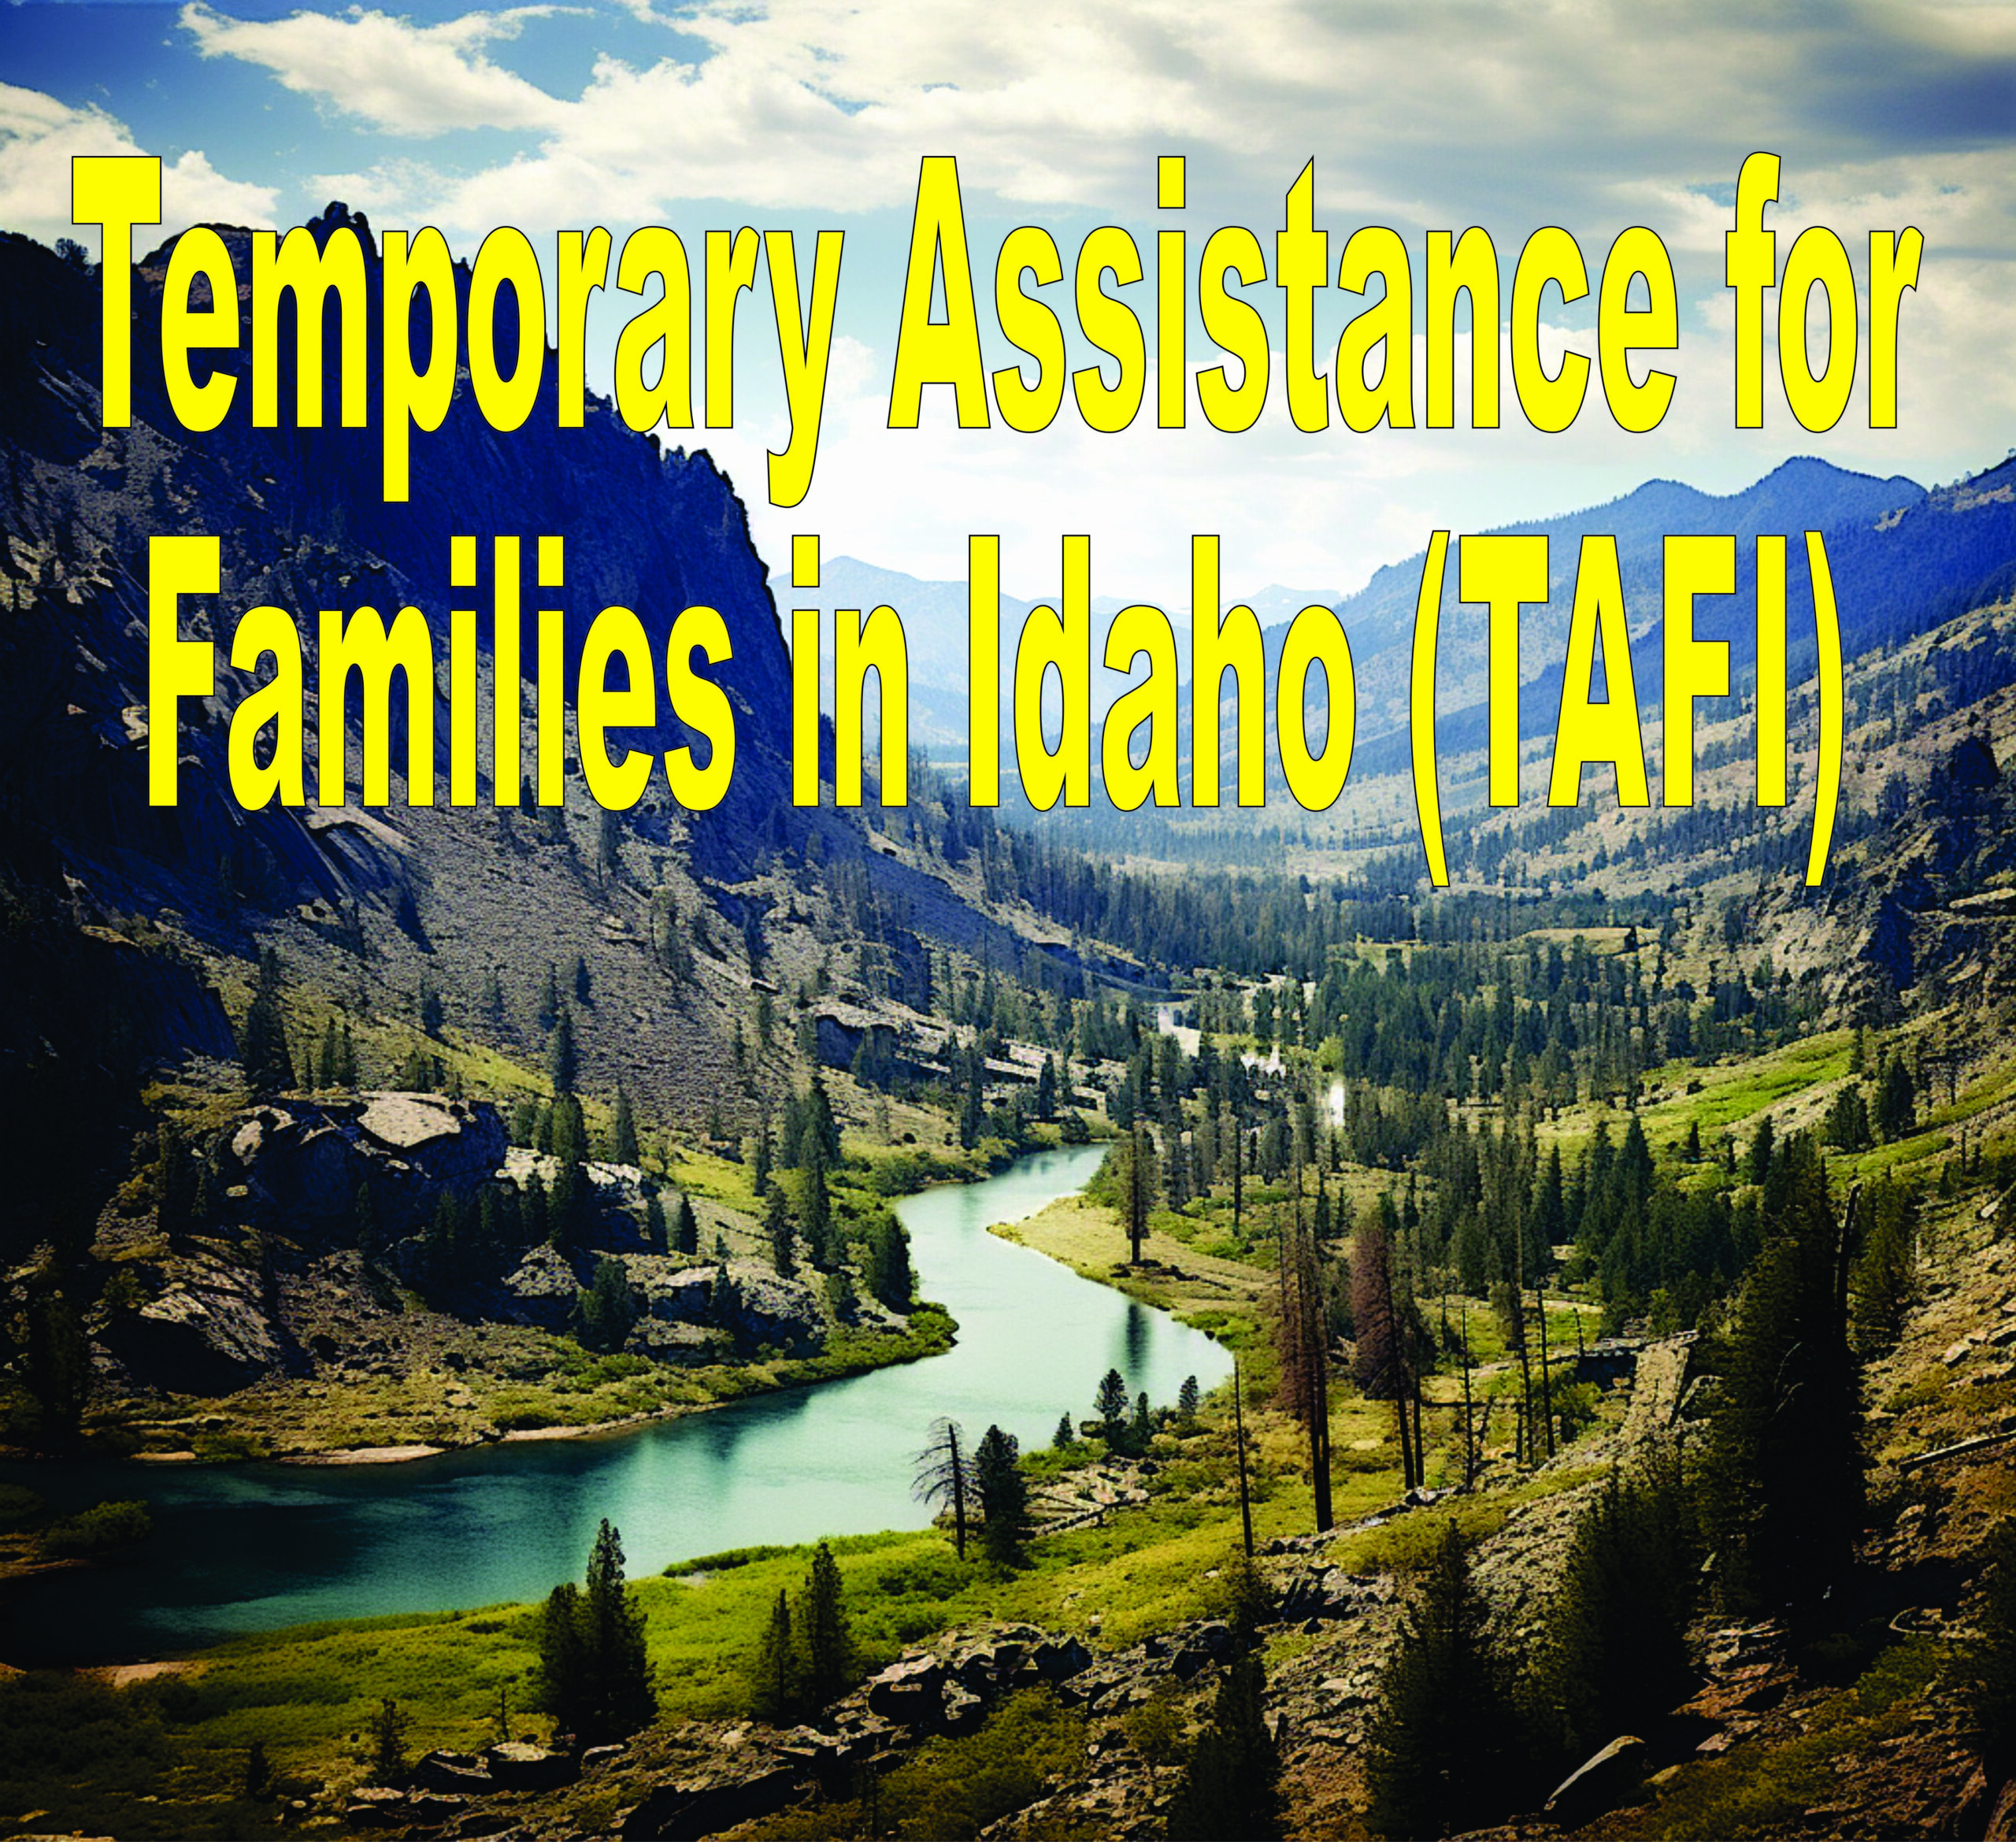 Temporary Assistance For Families In Idaho (tafi)